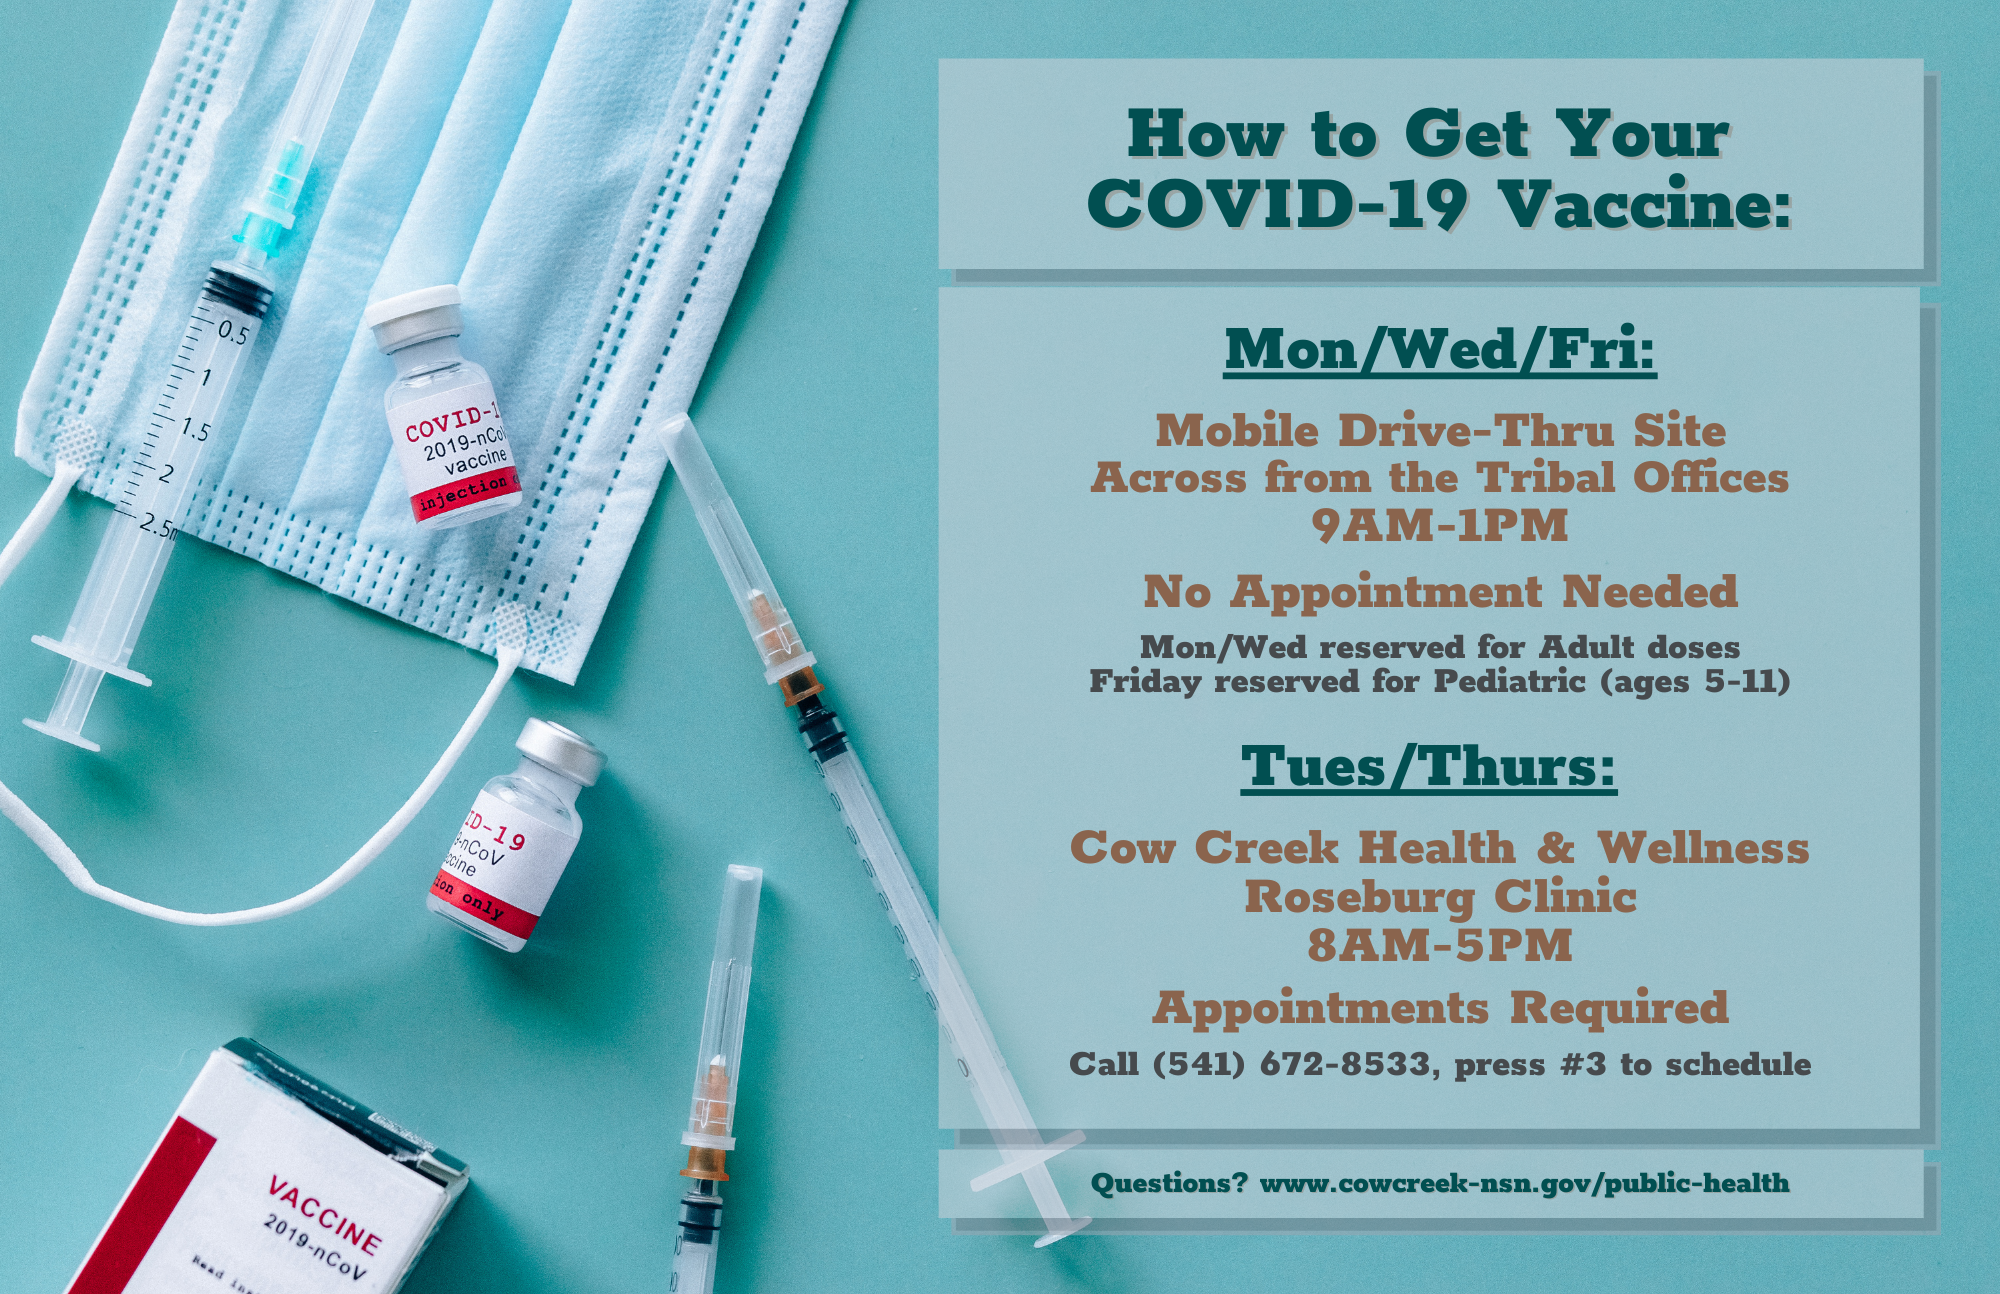 How to get a COVID-19 Vaccine or Booster